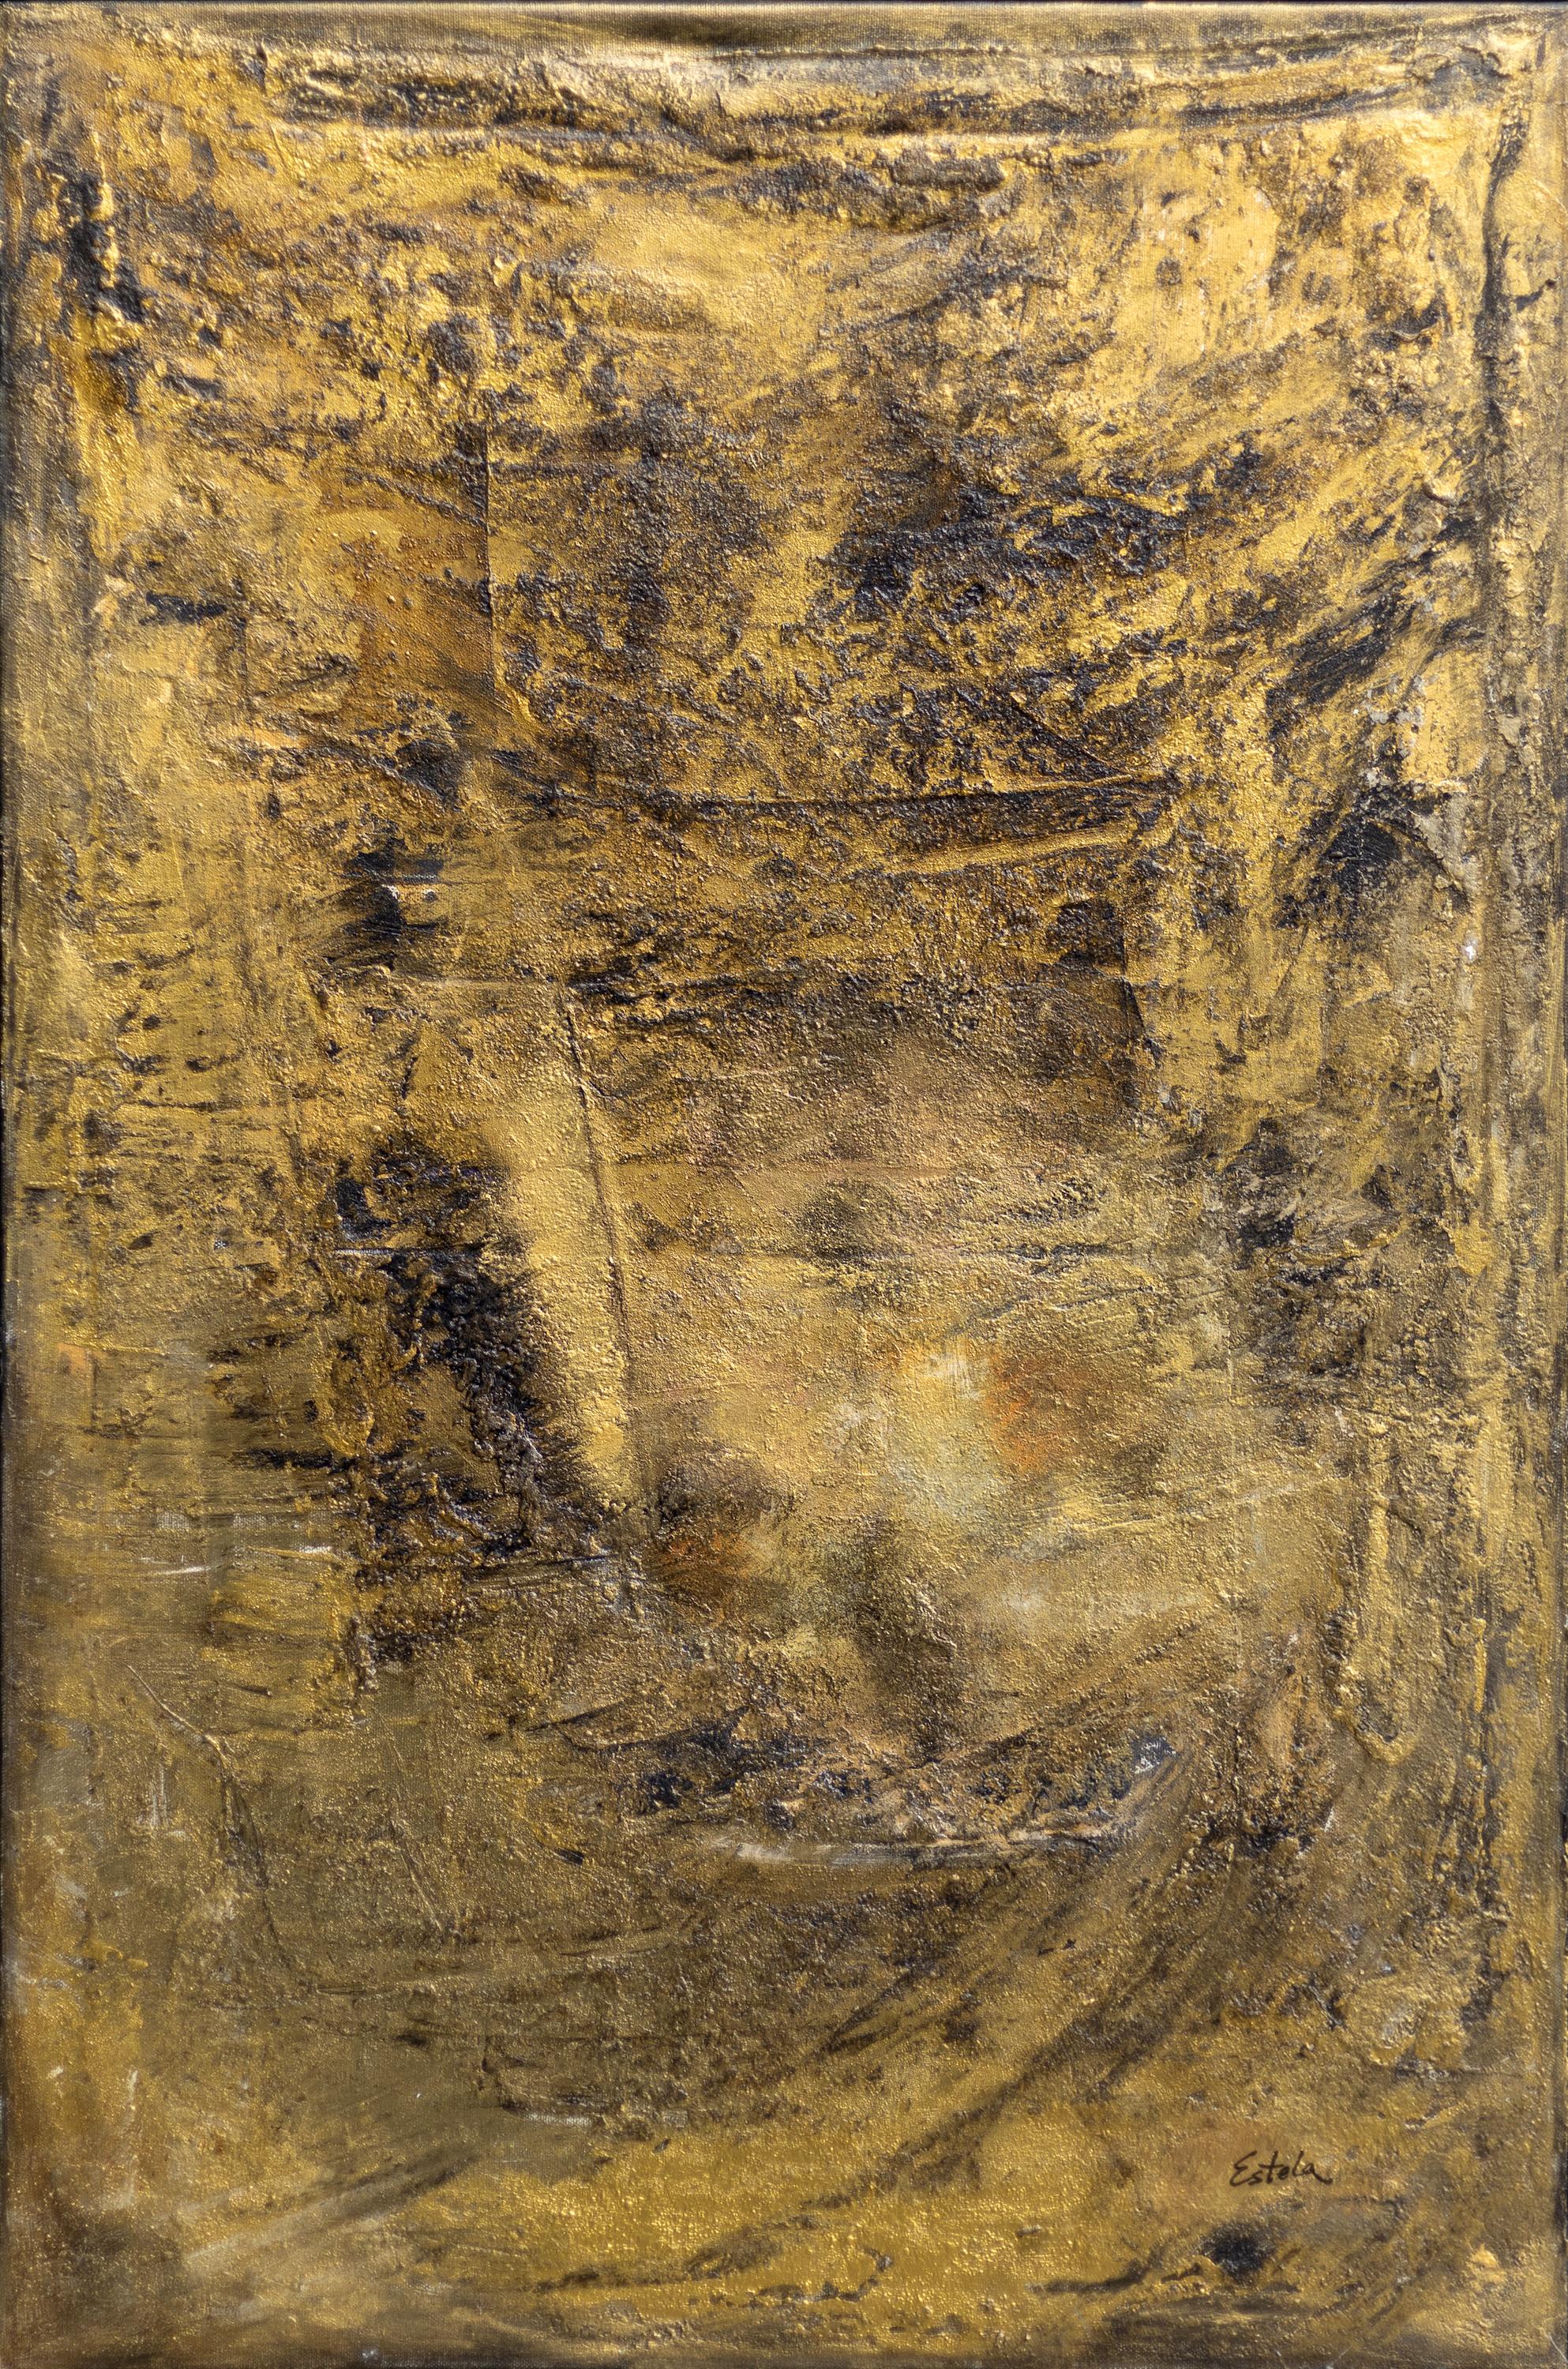 Gold - Painting by Estela Aguirre